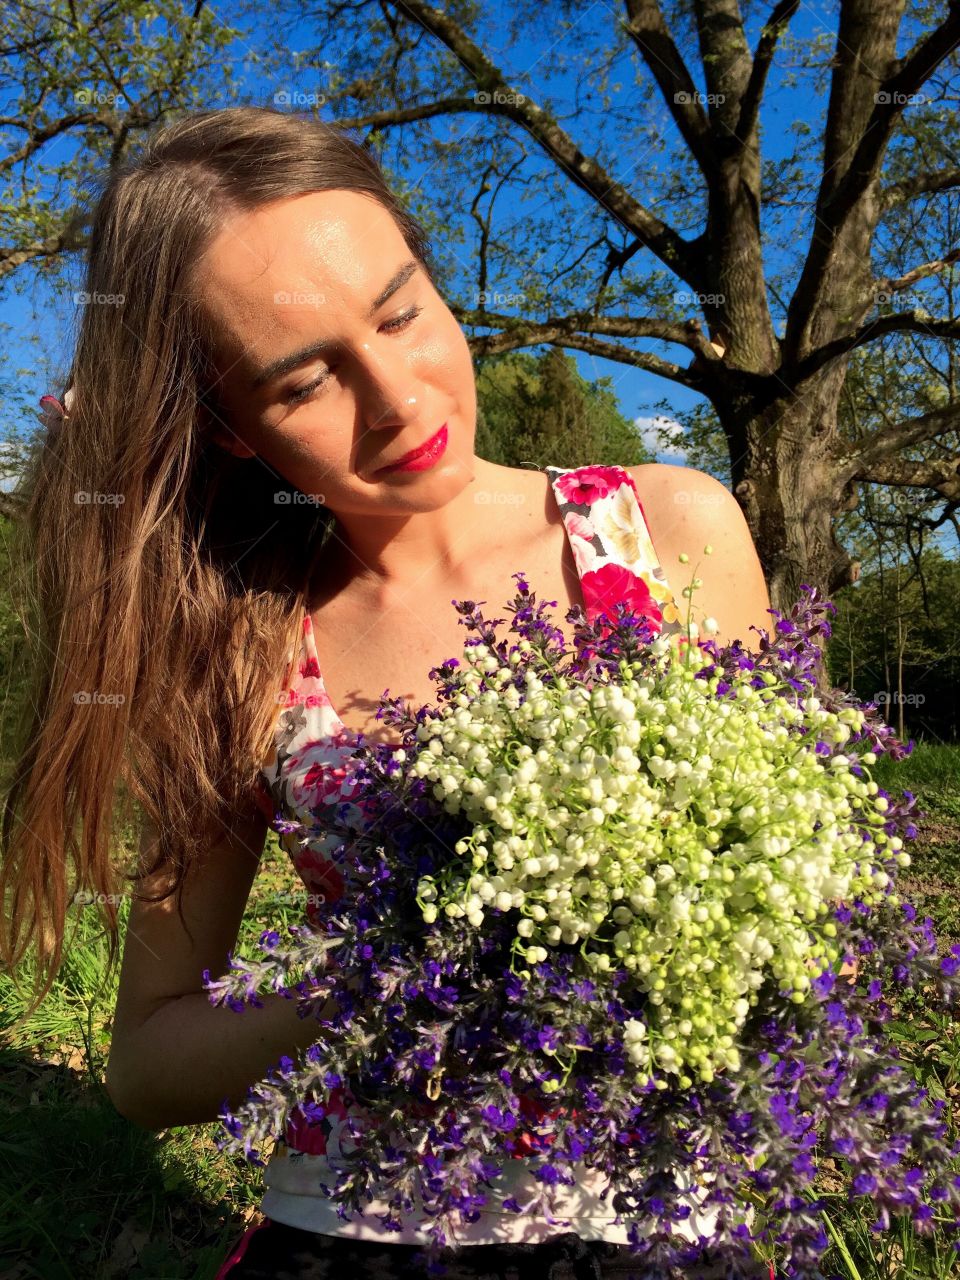 MPretty young woman holding a bouquet made of purple flowers and lily of the valley